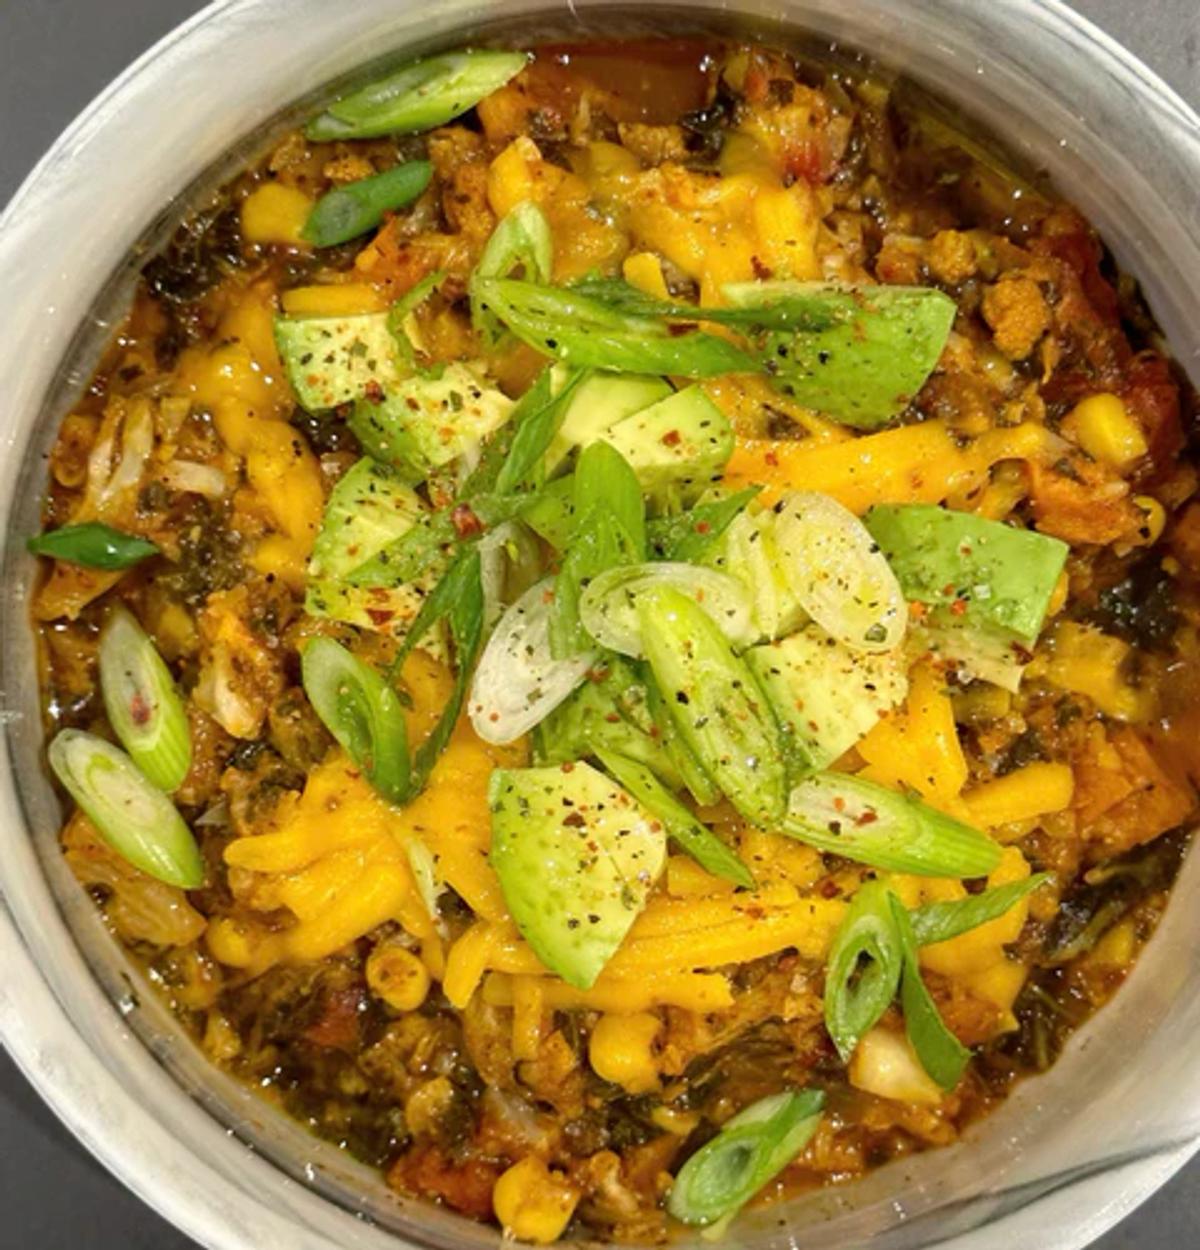 Soup bowl filled with vegan chili packed with veggies and cauliflower "meat" topped with green onion and vegan cheddar cheese. 